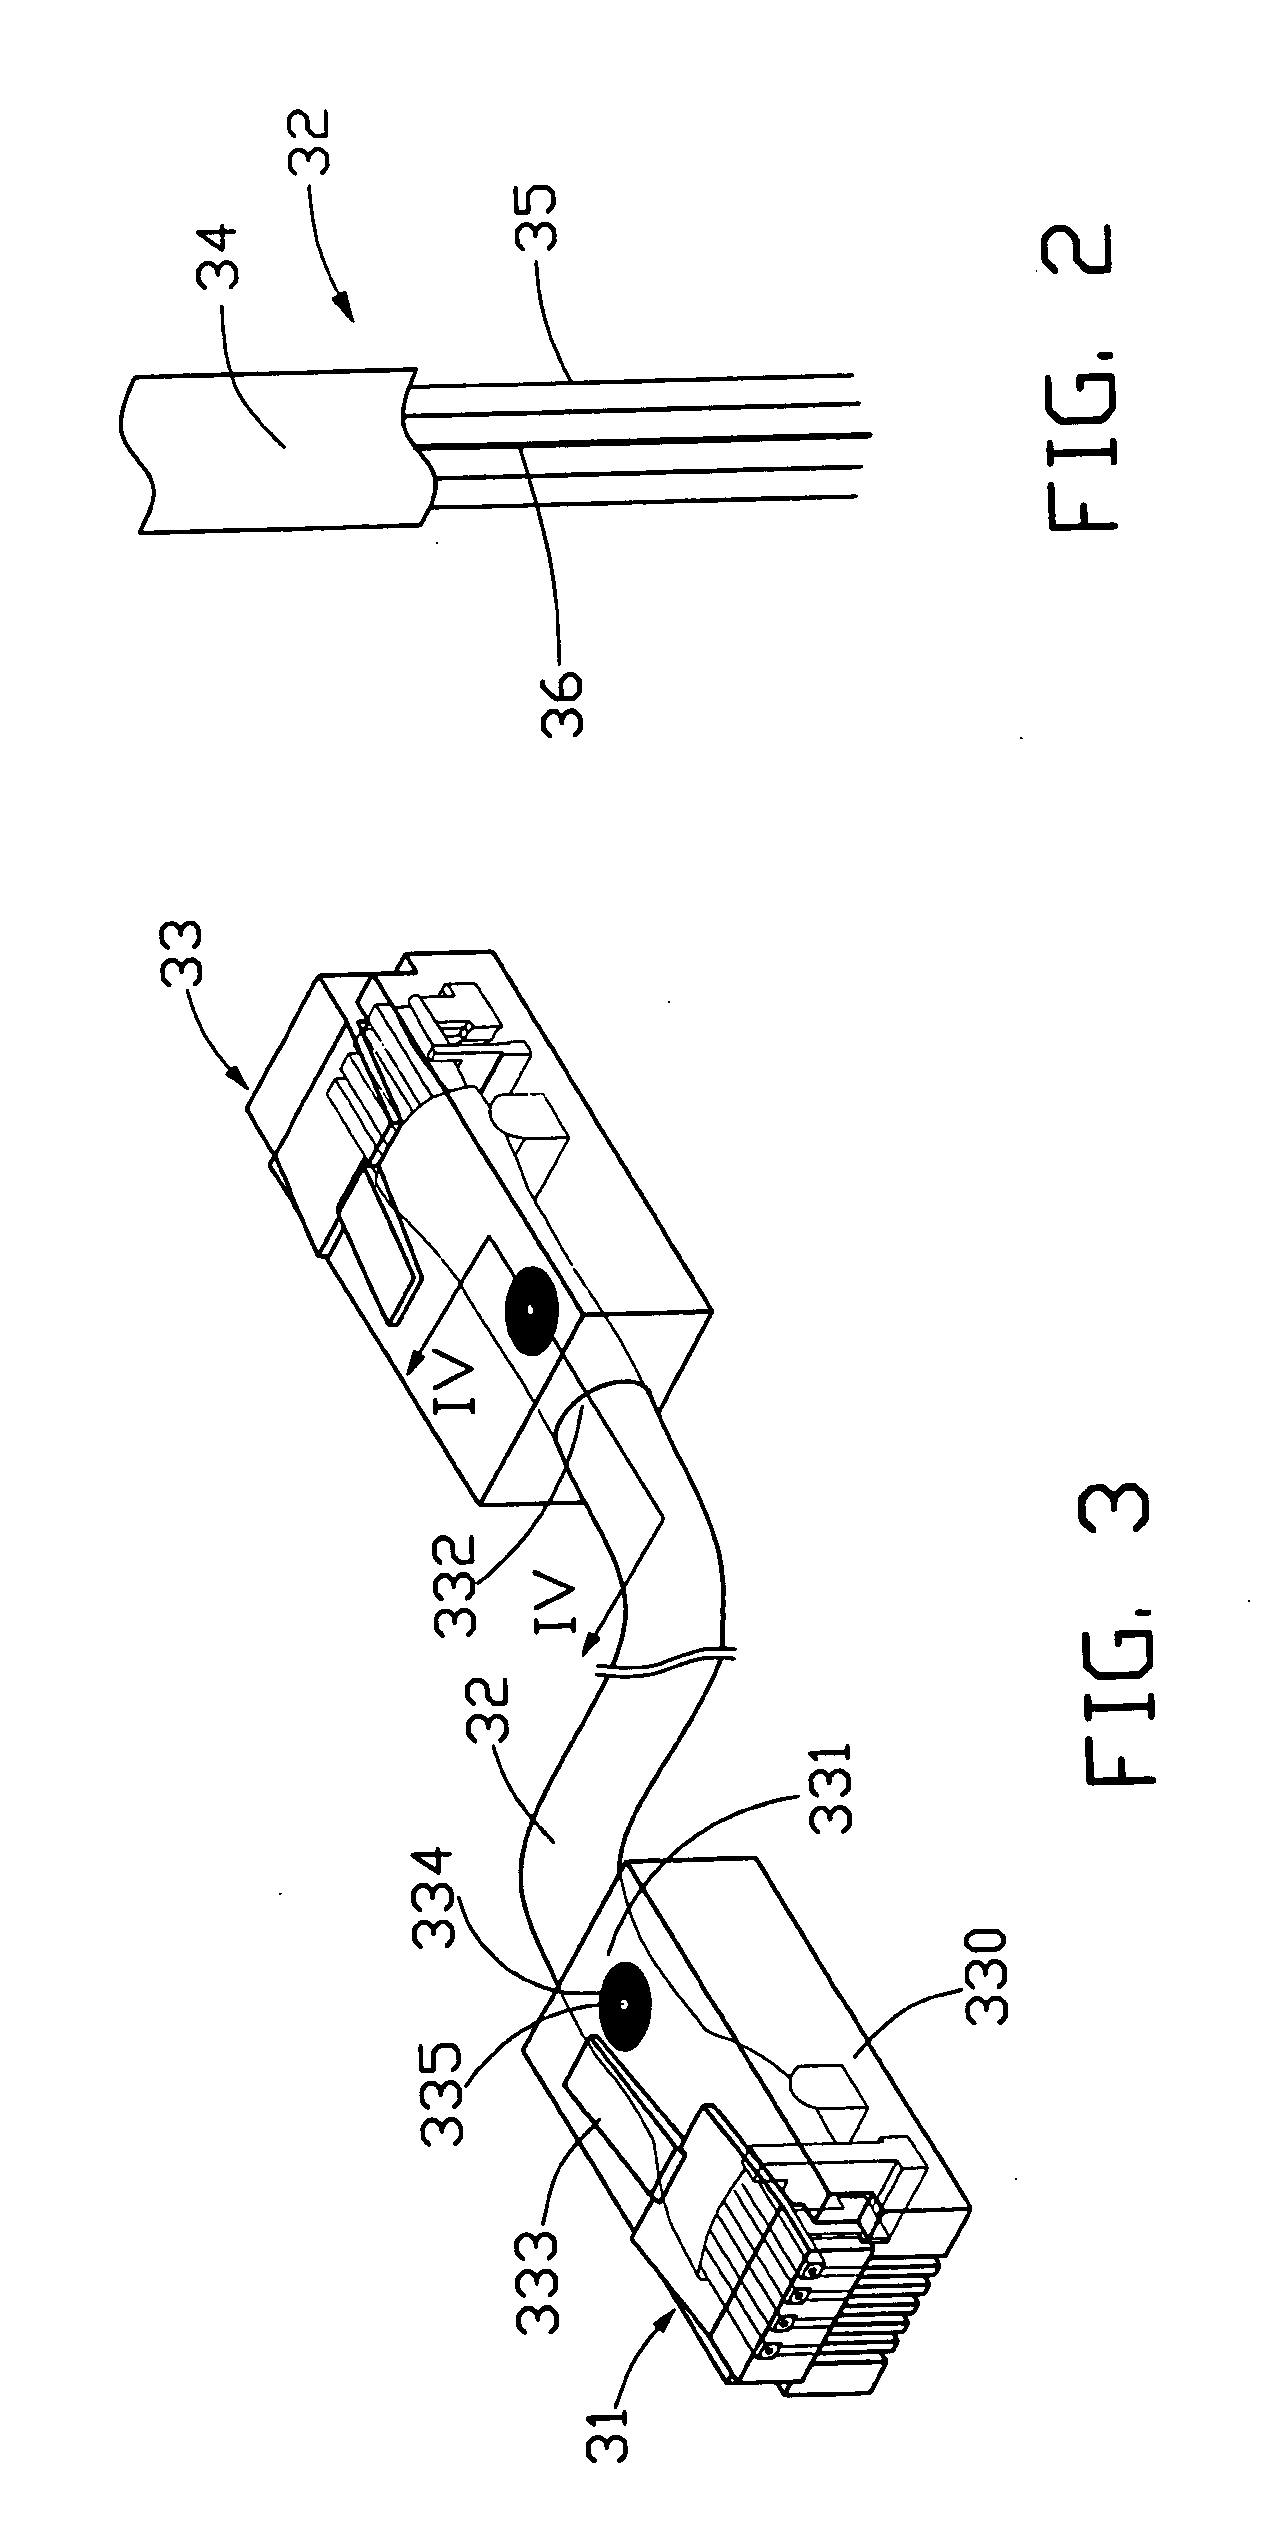 Traceable patch cable and connector assembly and method for identifying patch cable ends